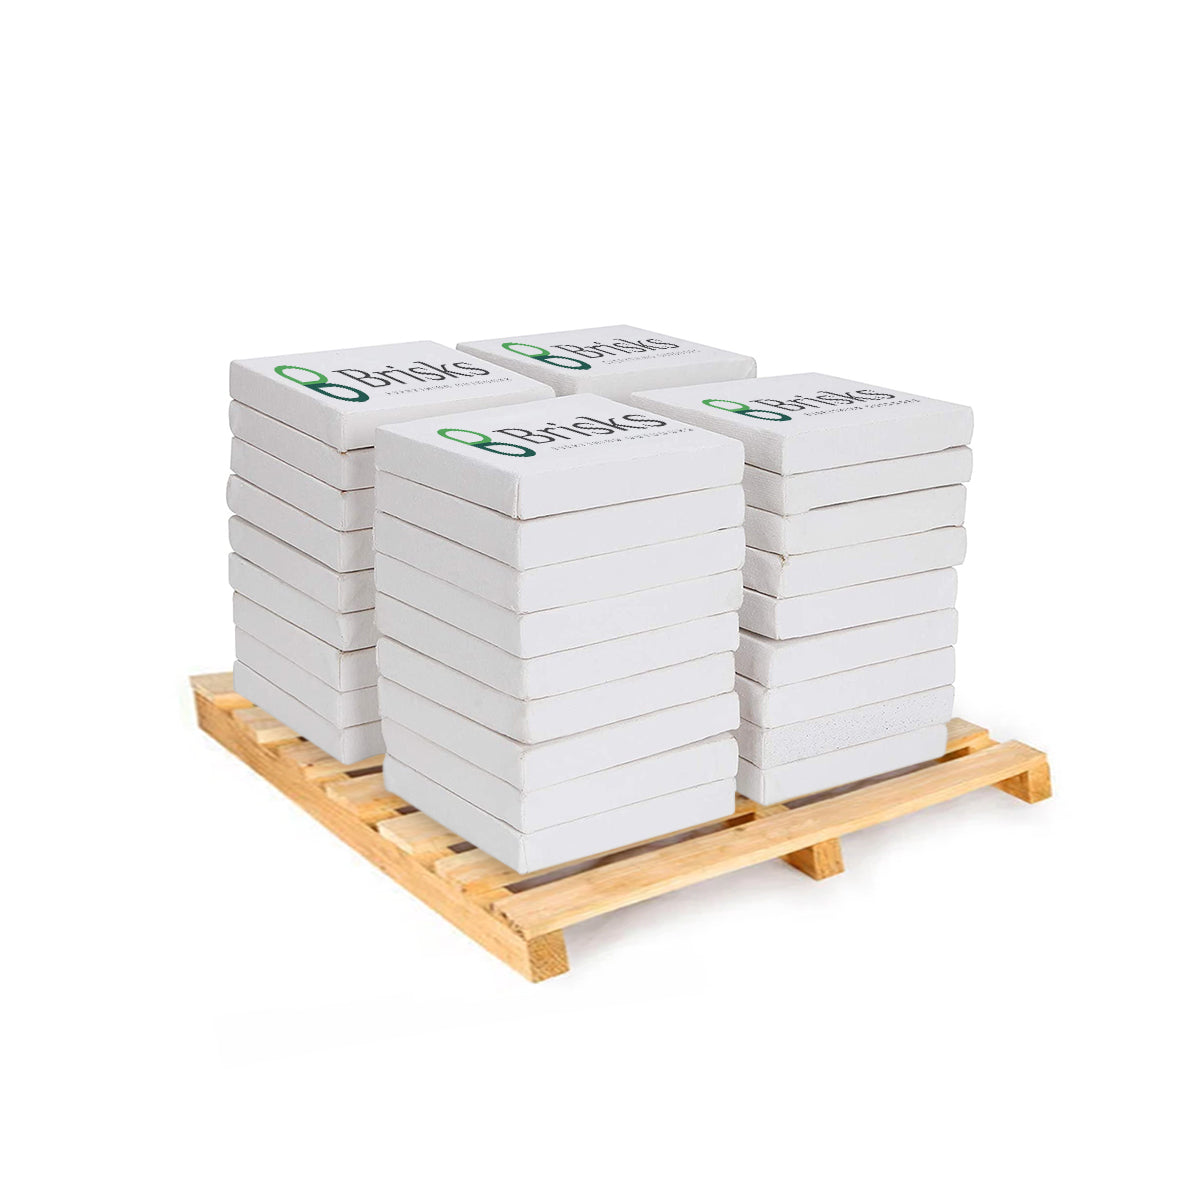 Two stacks of white rectangular bricks branded with the "Brisks" logo are neatly arranged on a wooden pallet. These ready-to-use Instant Concrete are uniform in size and color. The pallet, with its standard construction and natural wood finish, stands against a plain white background.